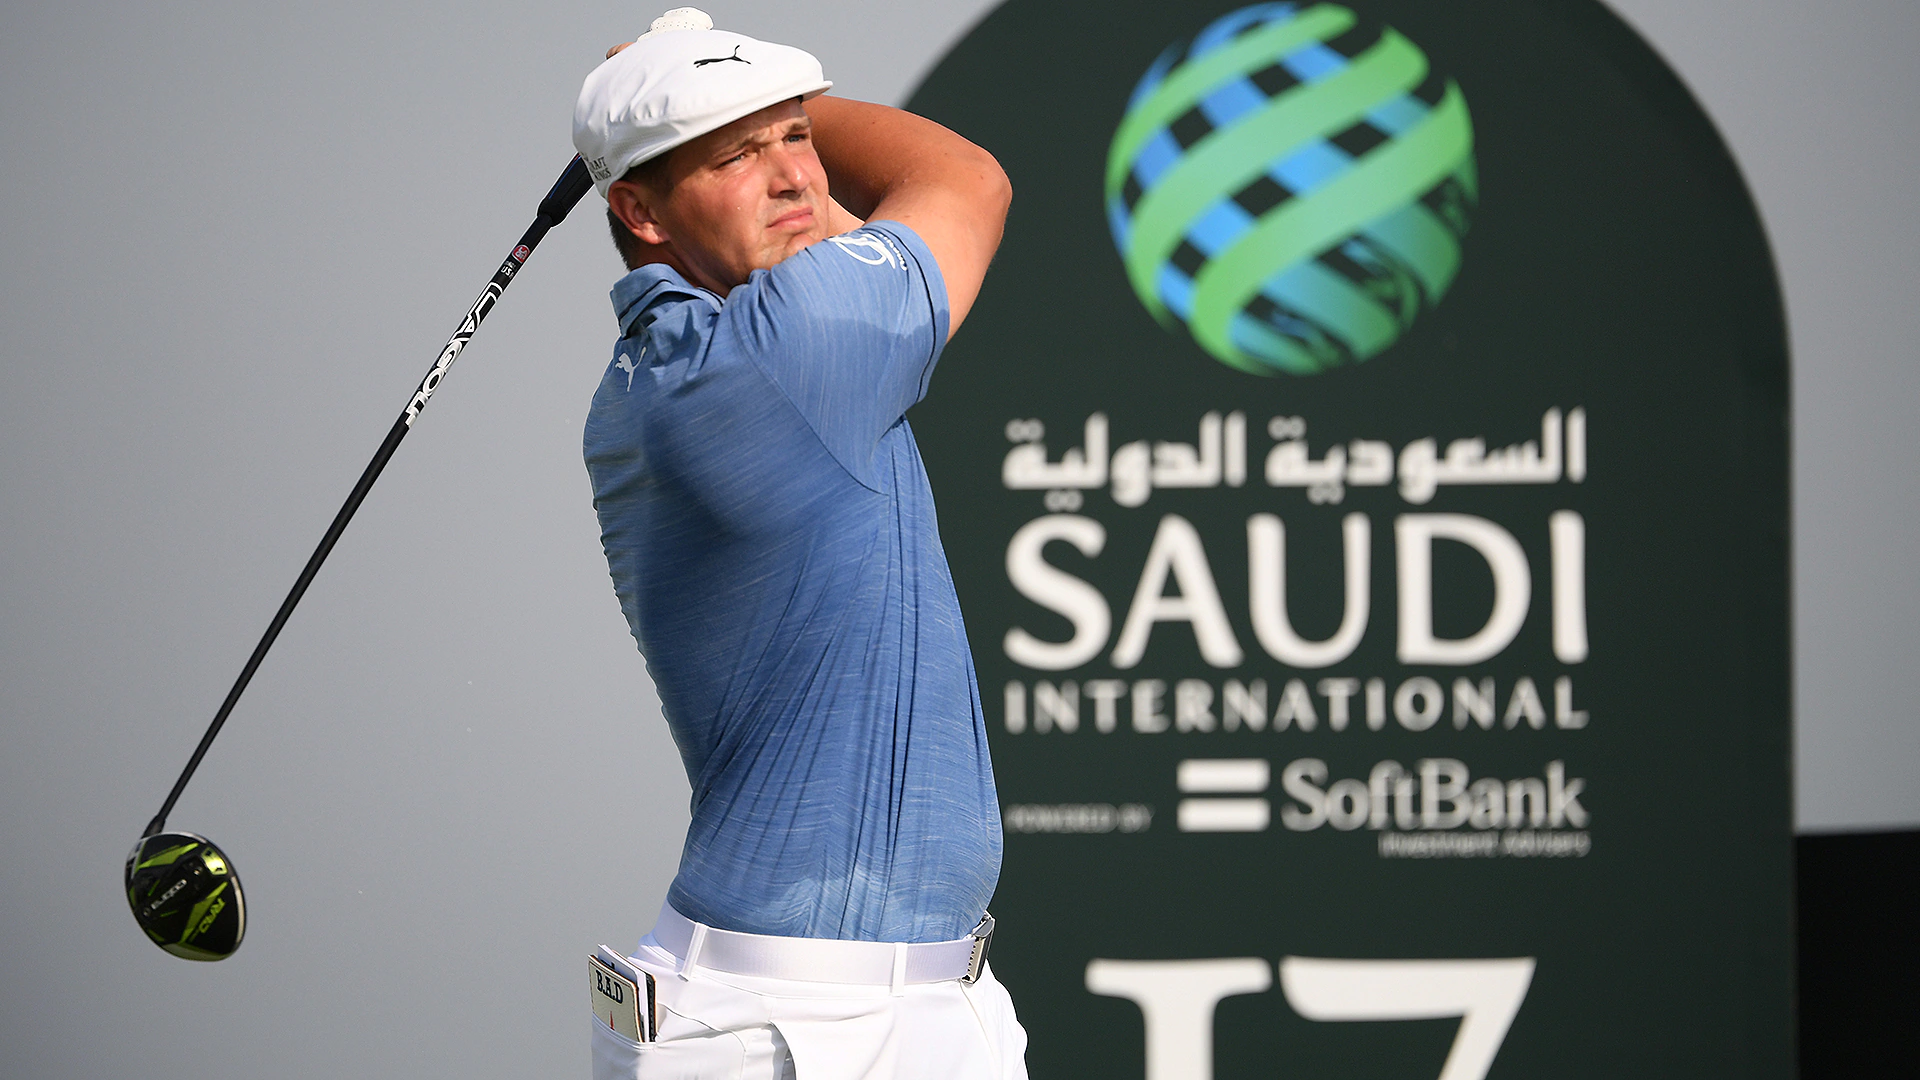 PGA Tour deciding if star players will be allowed to compete in 2022 Saudi event